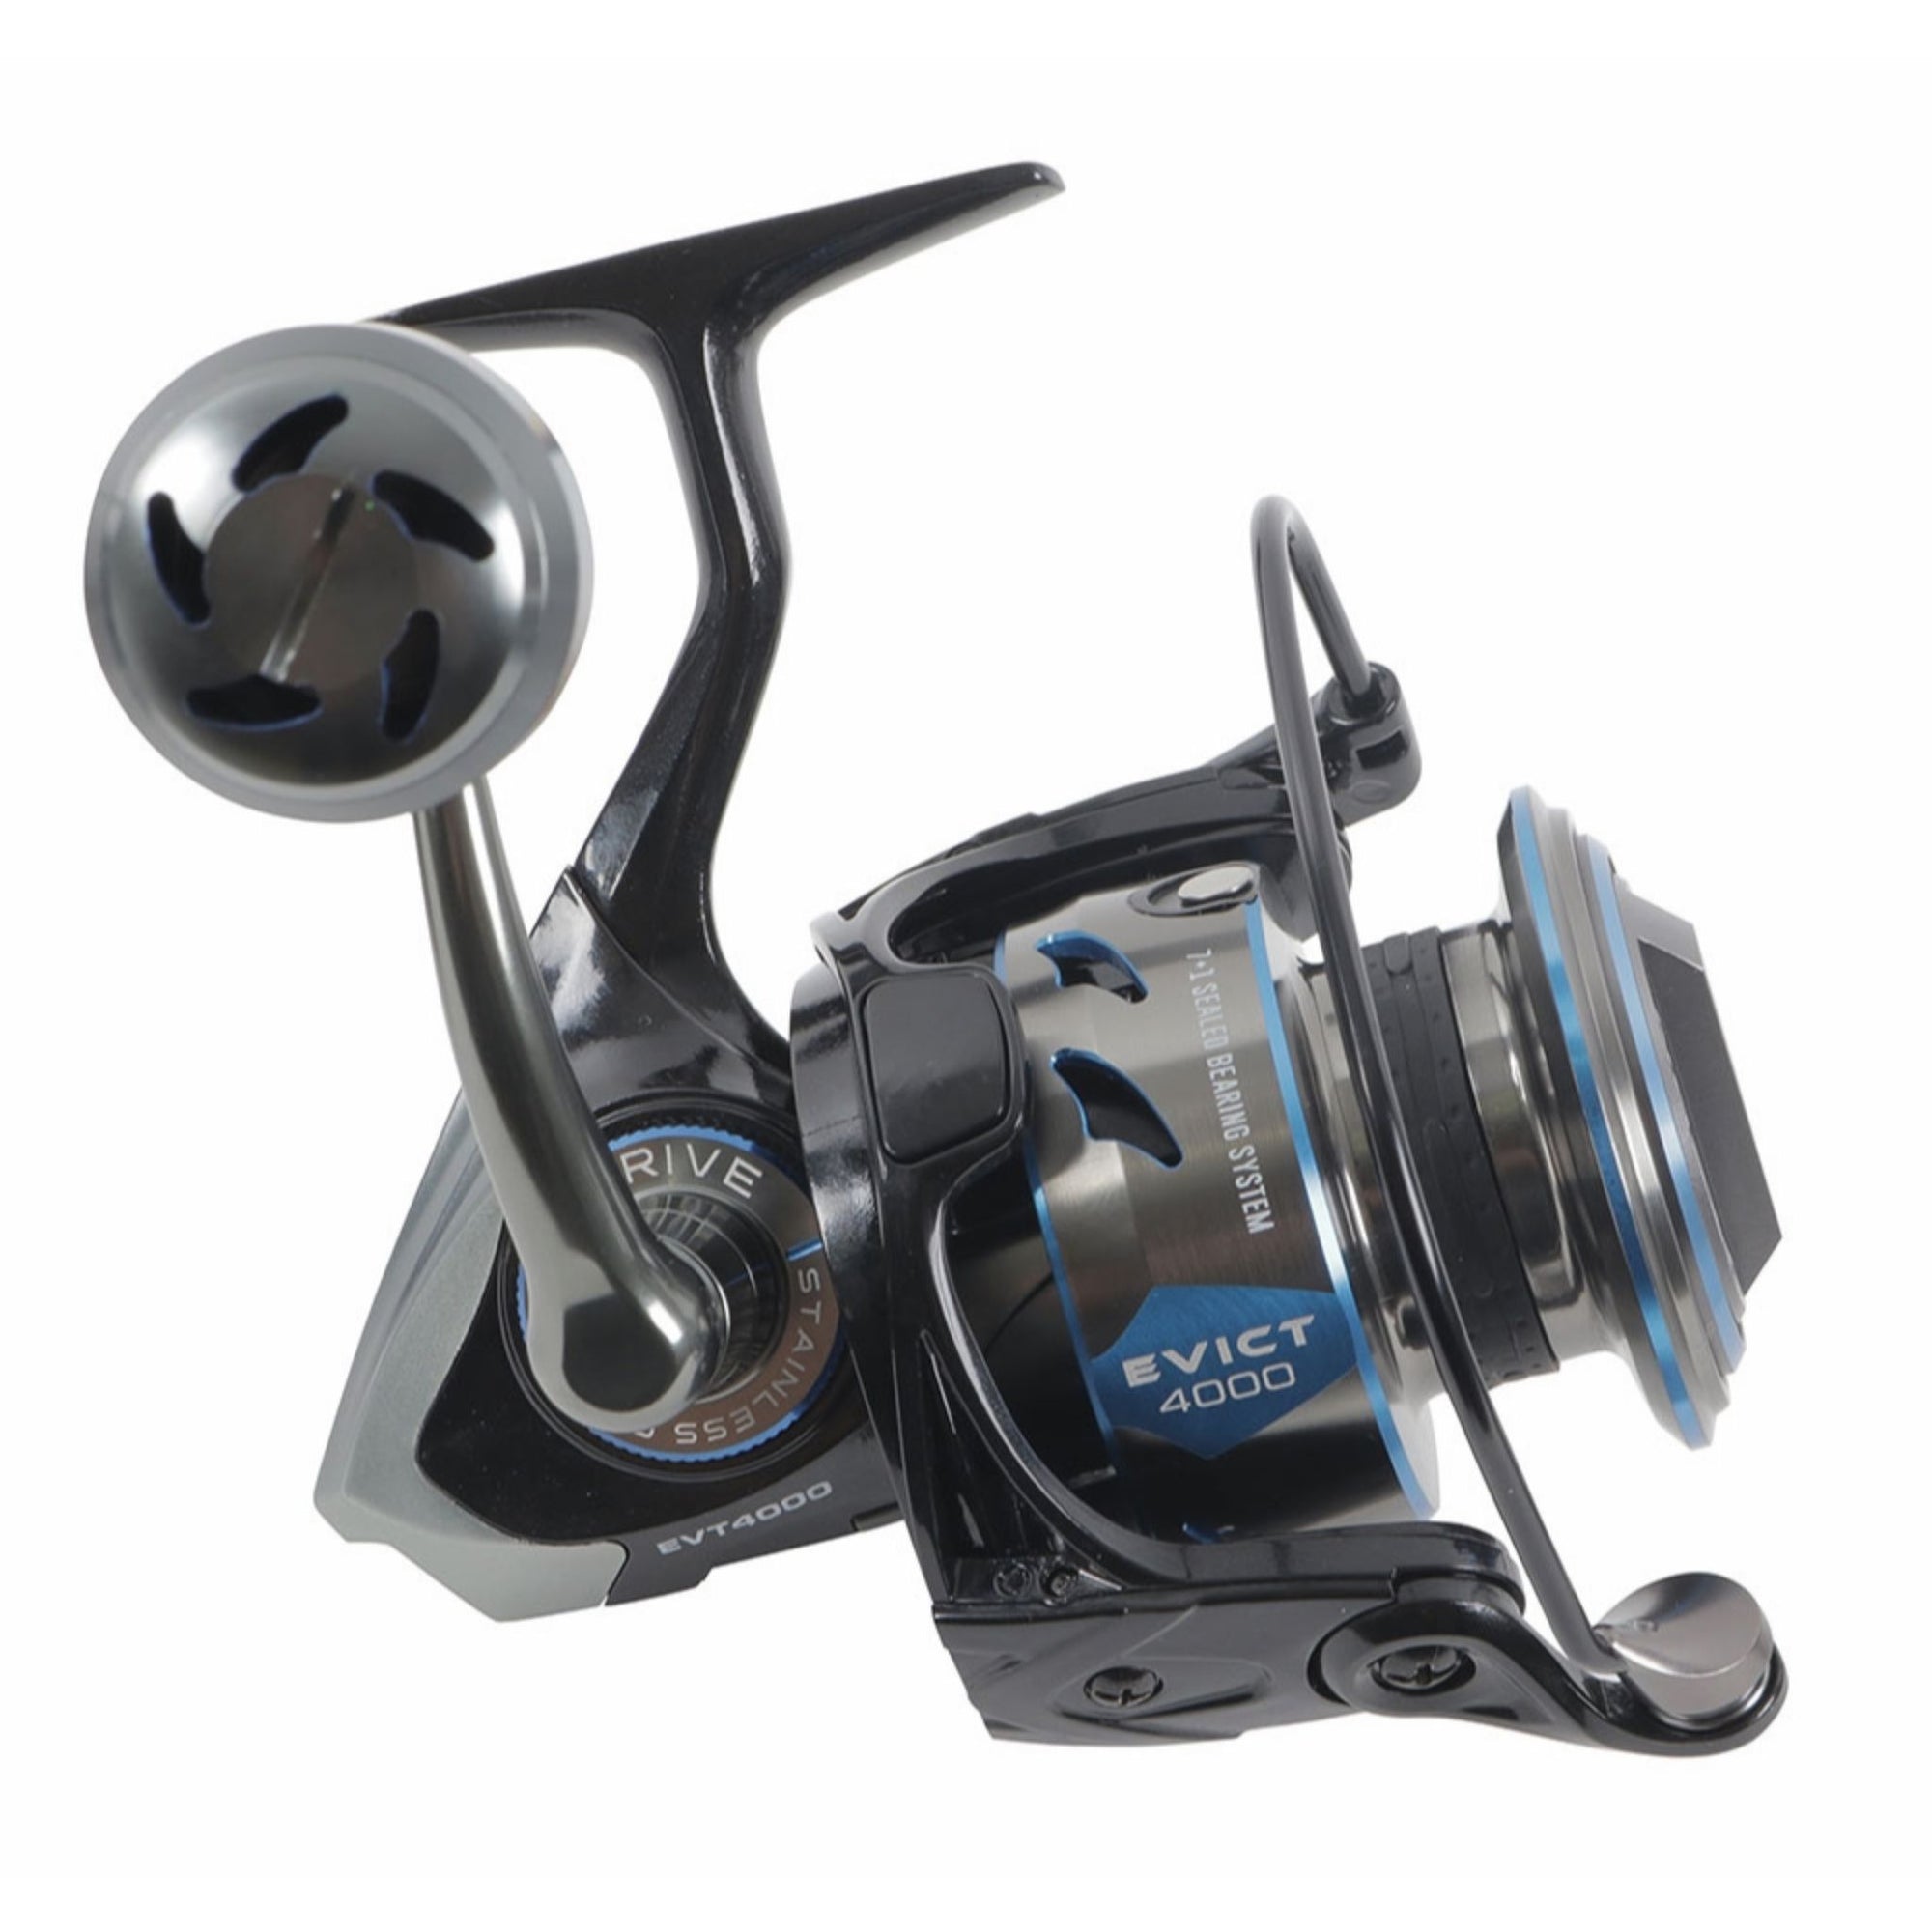 Evict Spinning Reel